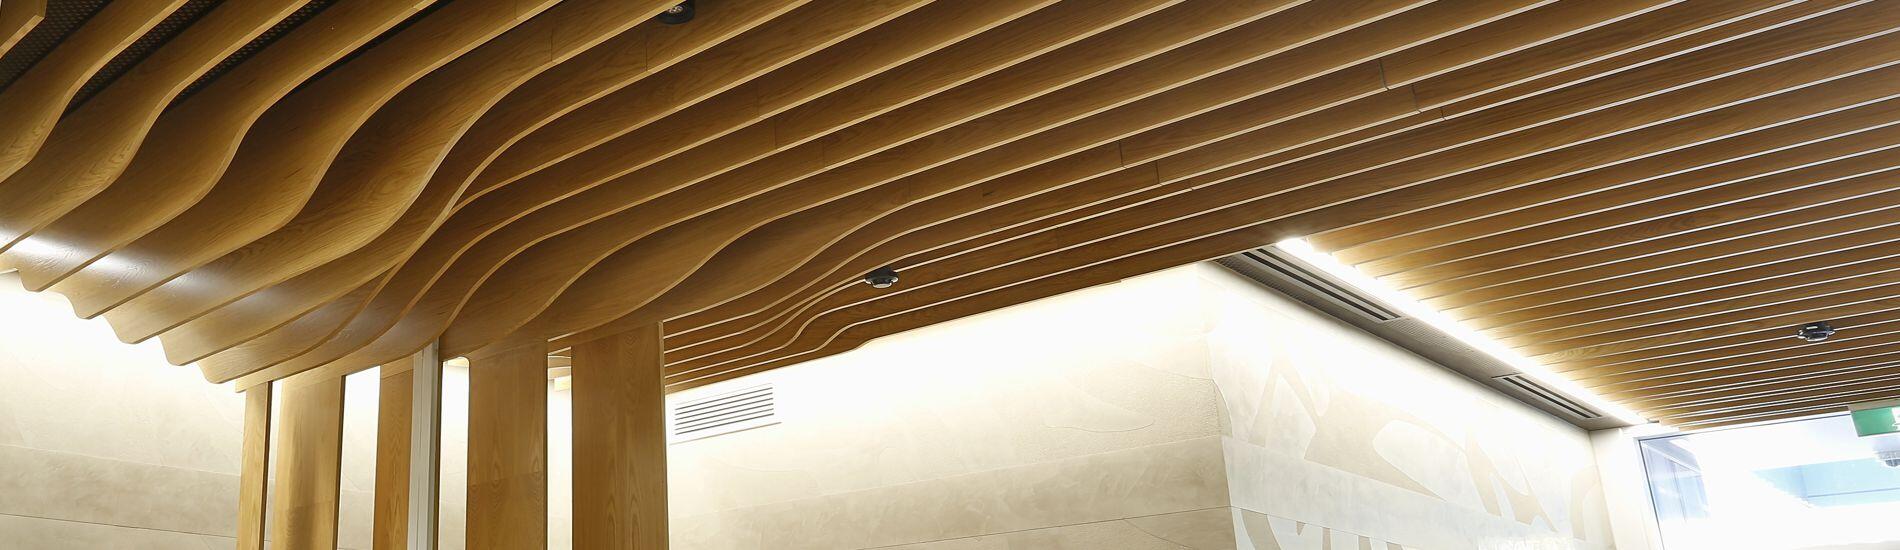 WAVE BLADES Backed With SUPACOUSTIC Acoustic Panels Form BCA Compliant Feature Ceiling in School Entry